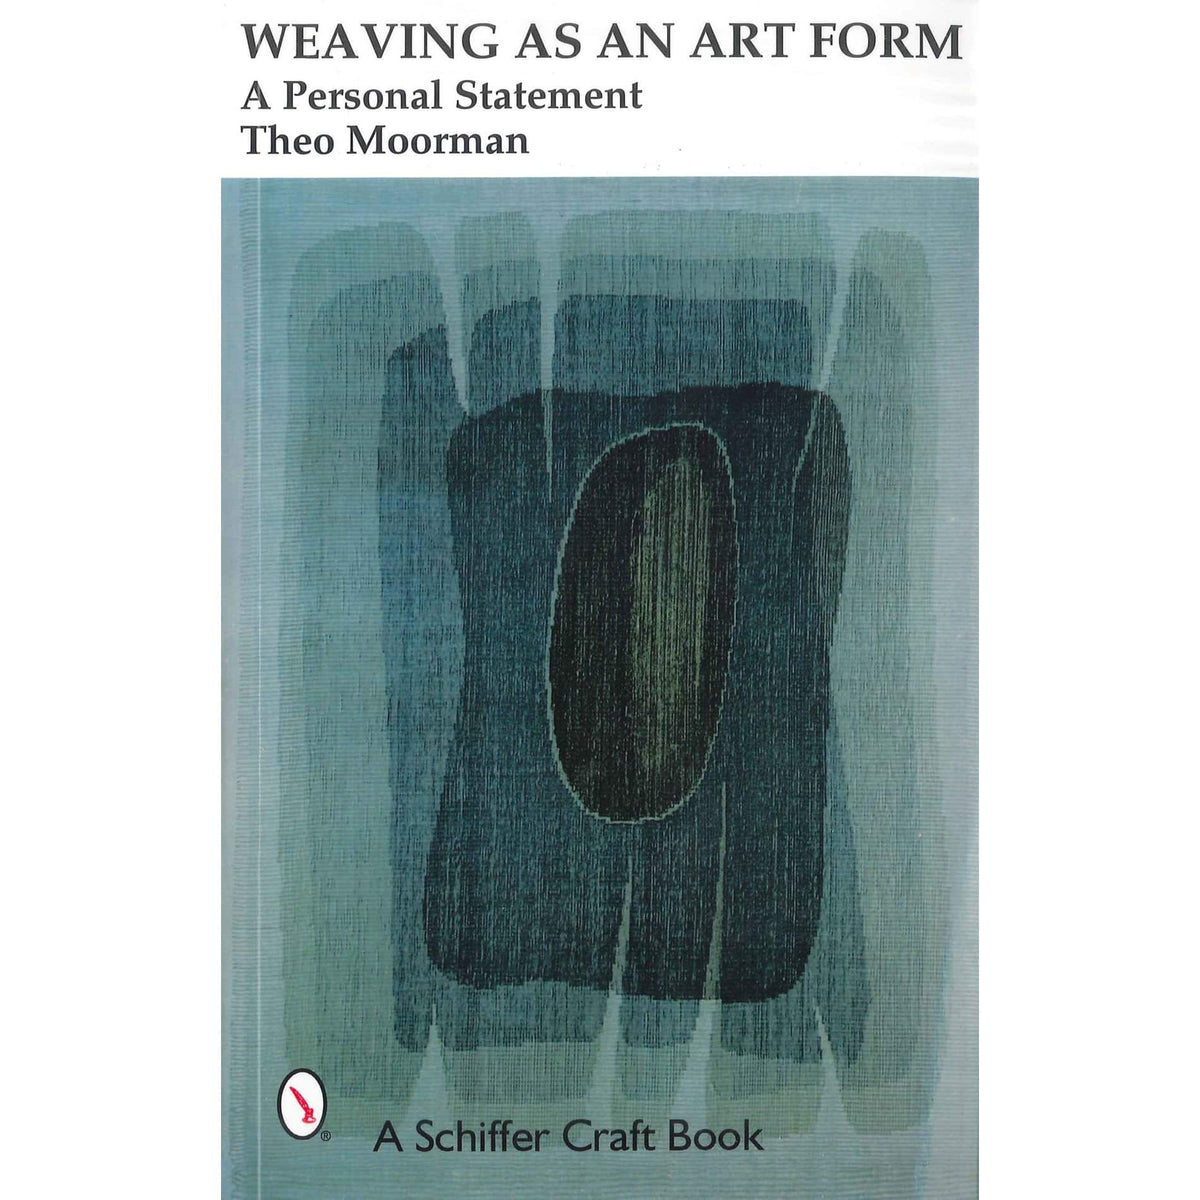 Weaving as an art form - a personal statement